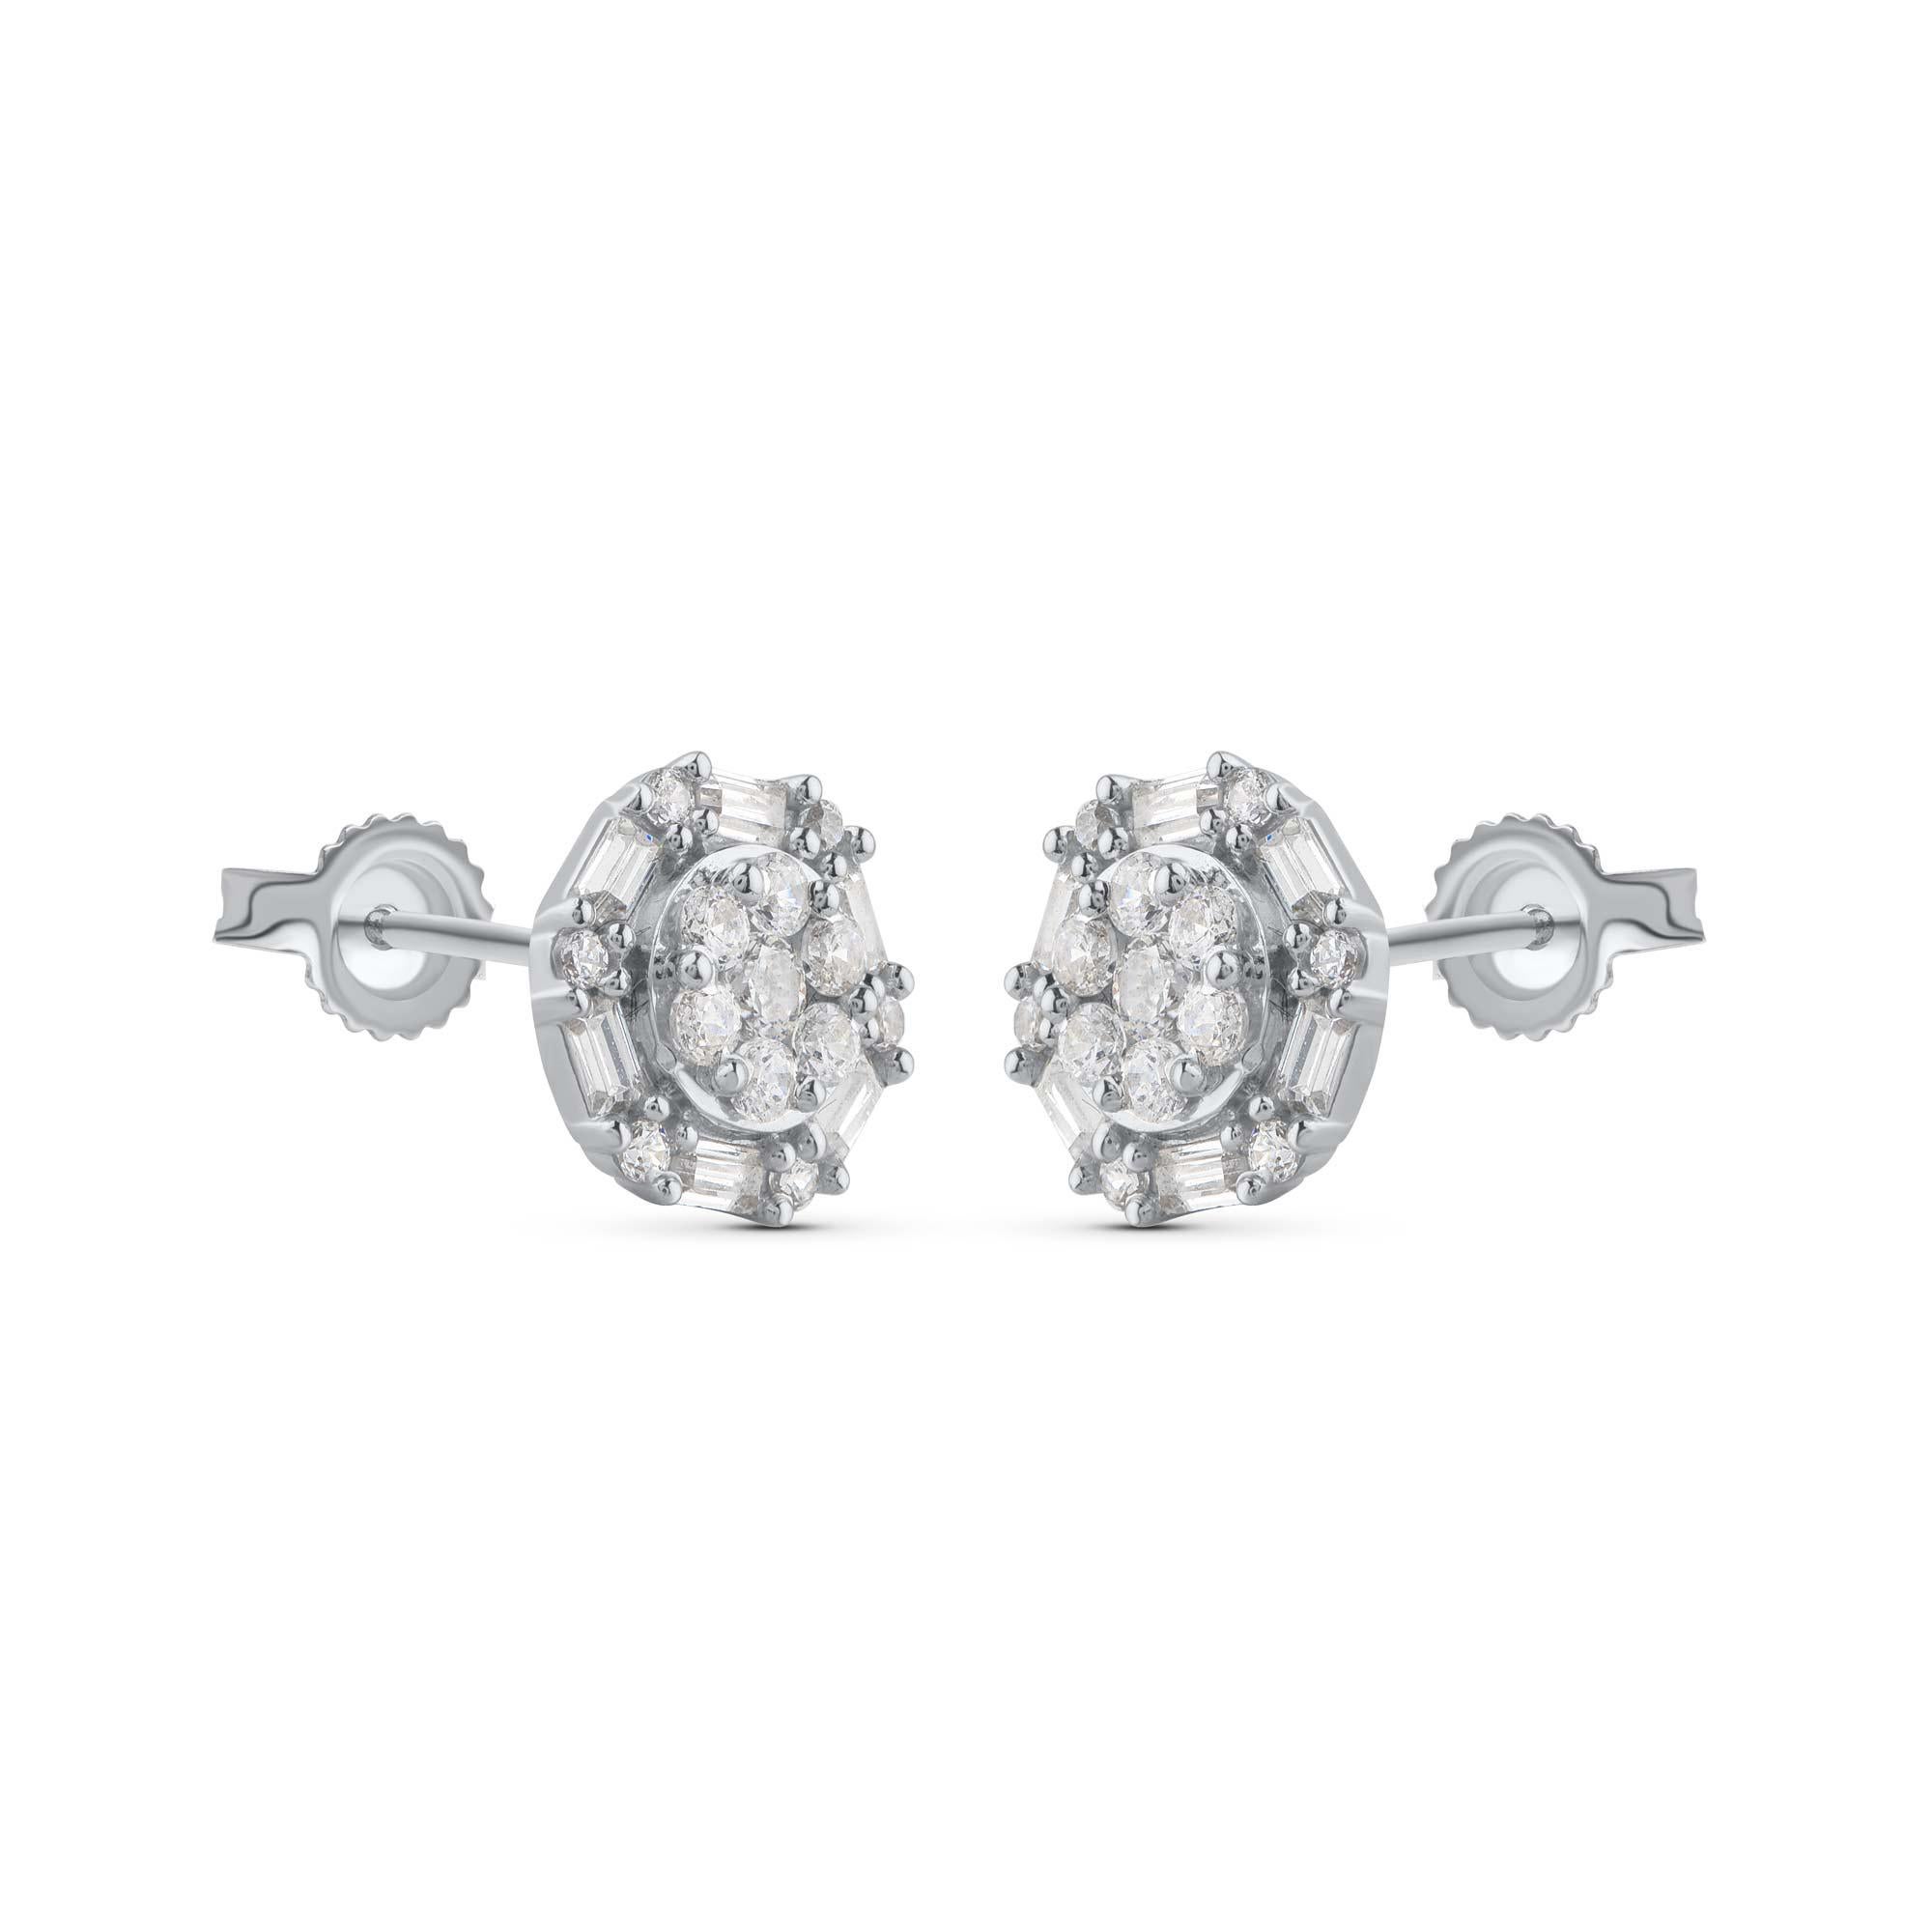 Look your elegant best in these everyday diamond studs. These diamond earrings are studded with 26 round and 12 baguette shape diamonds. The diamonds are graded HI Color, I2 Clarity. The earrings secure comfortably with post and back. 

This piece